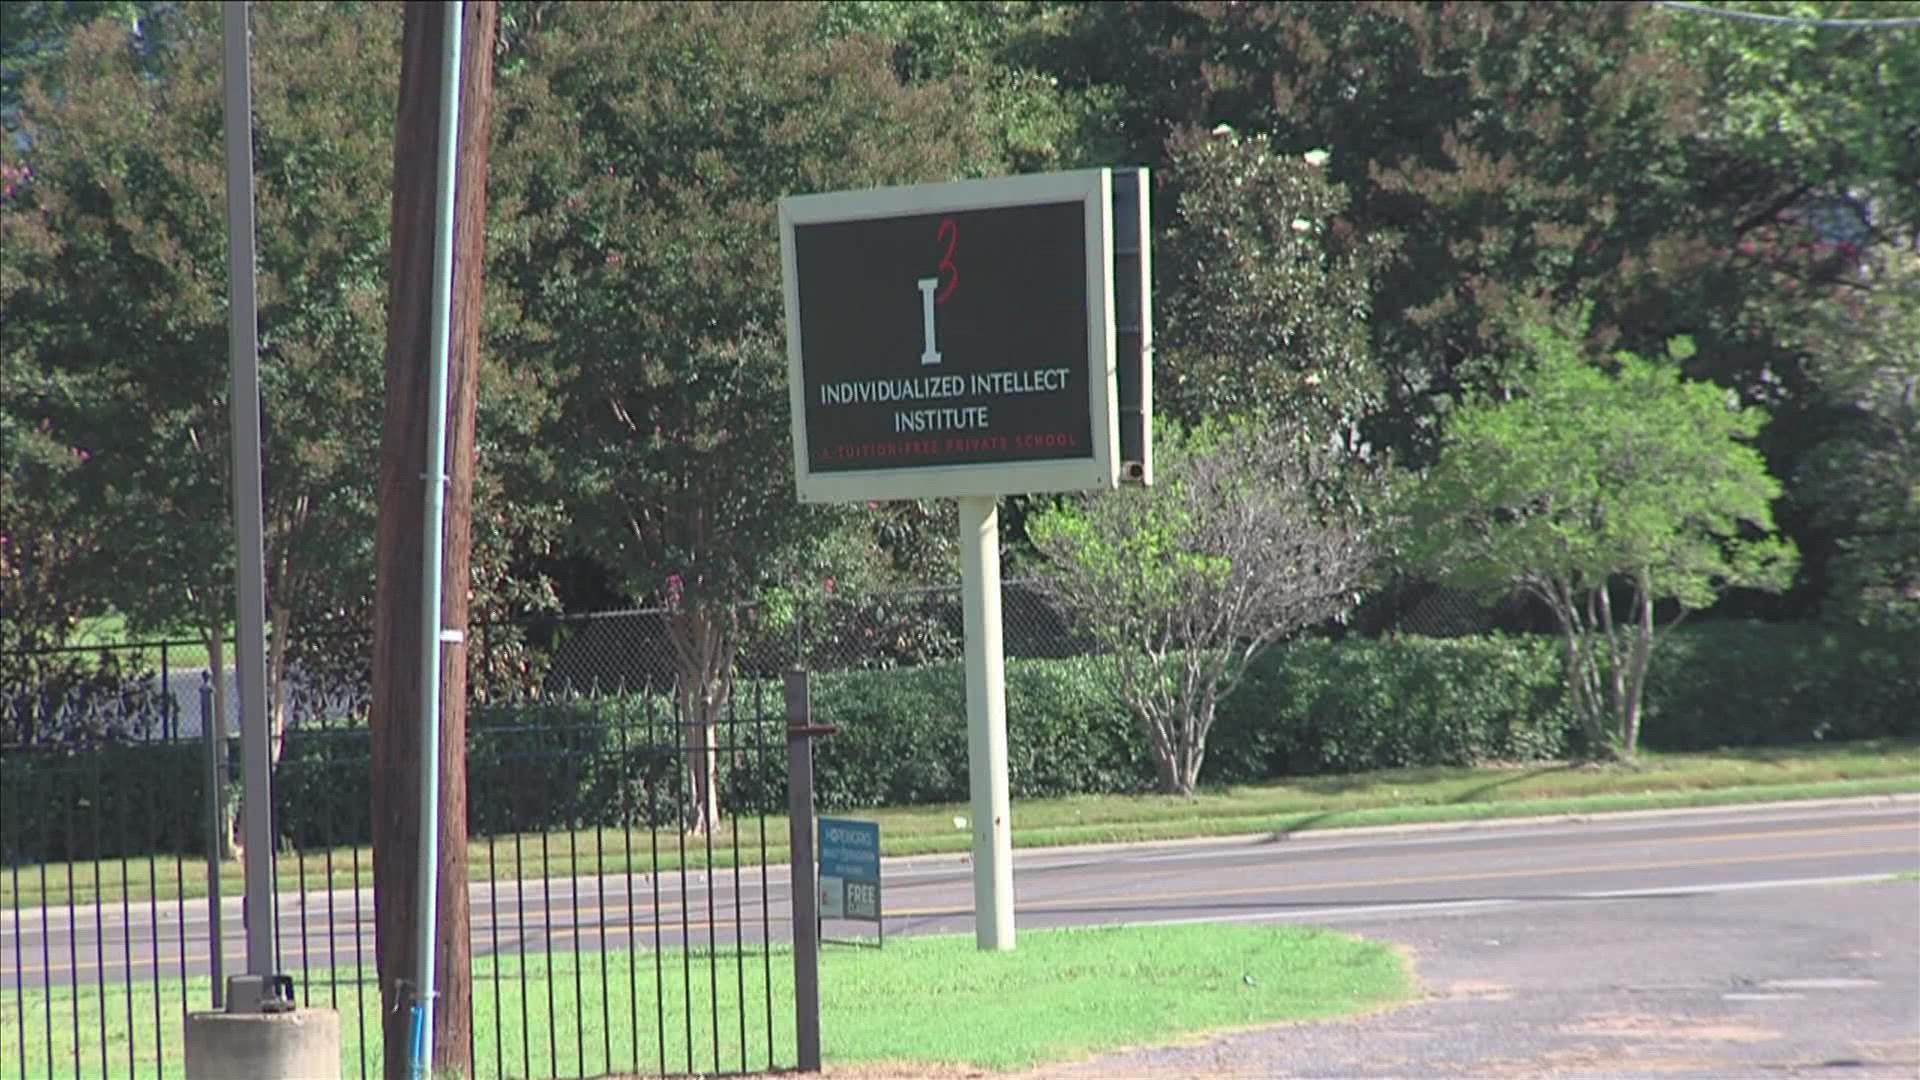 Several former teachers at Individualized Intellect Institute say they never got paid while working at the South Memphis school before it unexpectedly closed.